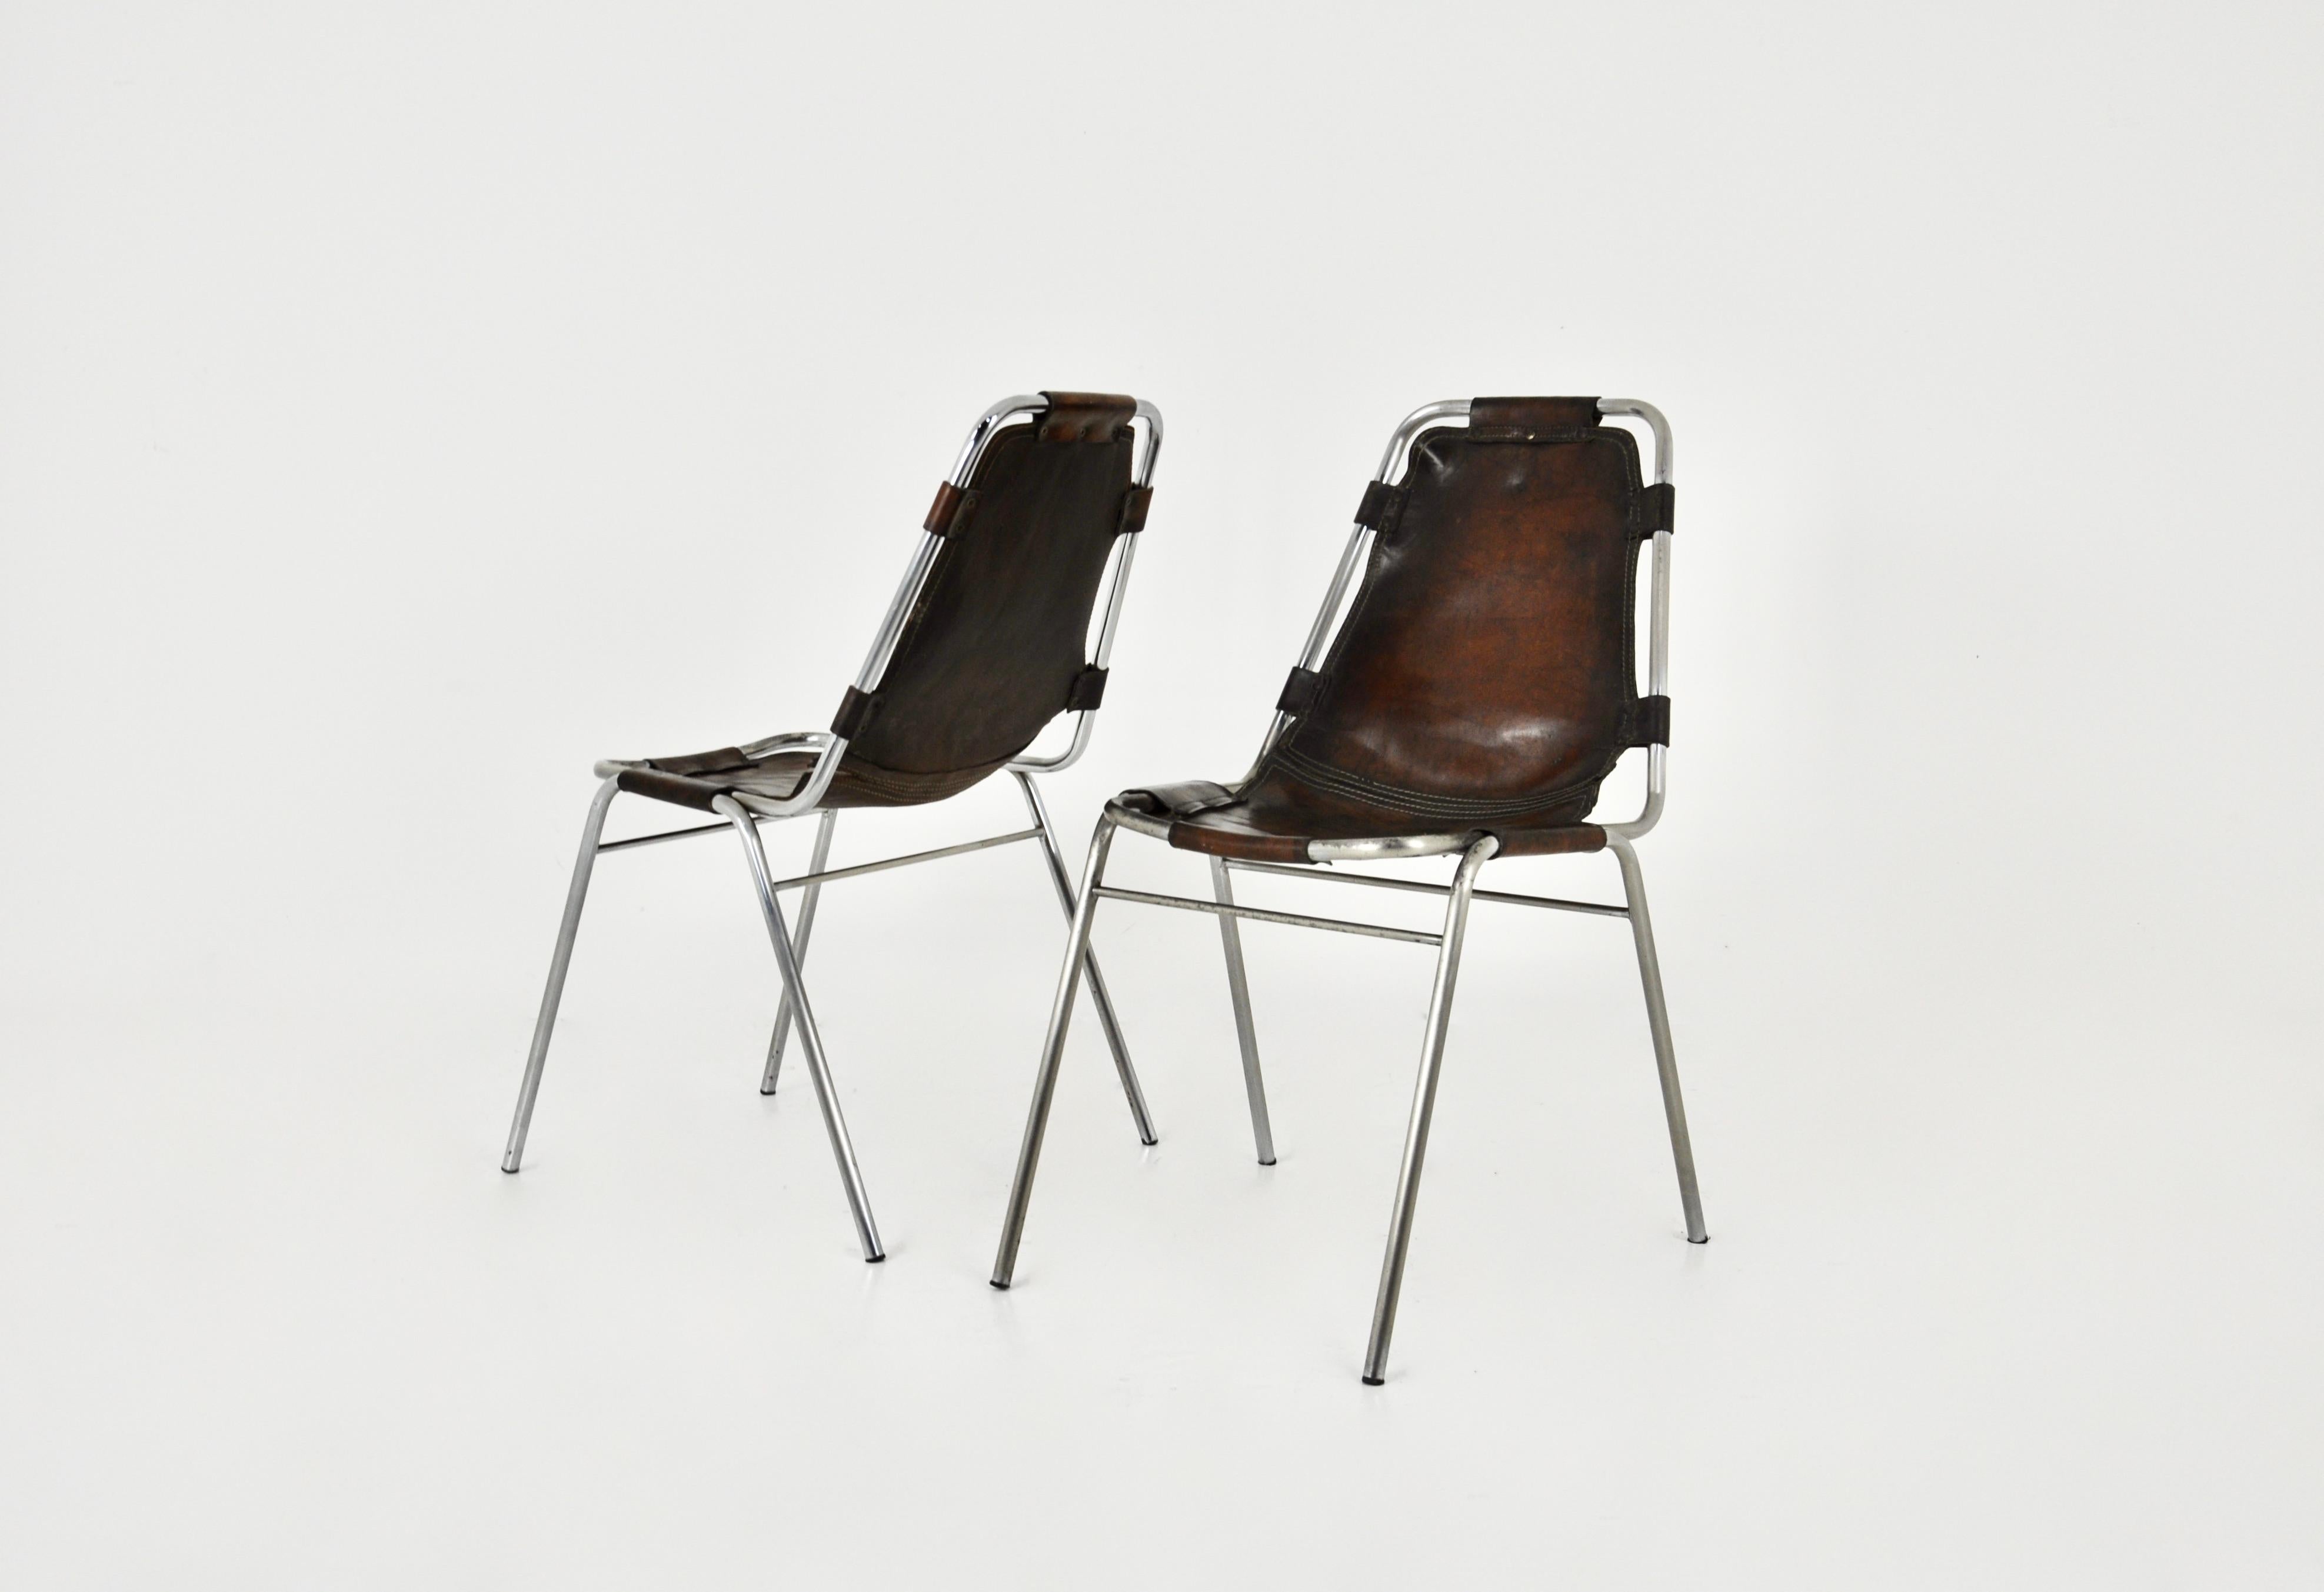 Set of 2 chairs in leather and chromed metal. This model was designed by Charlotte Perriand for the French ski resort of Les Arcs in the 1960s. Seat height: 43 cm. Wear due to time and age of the chairs.